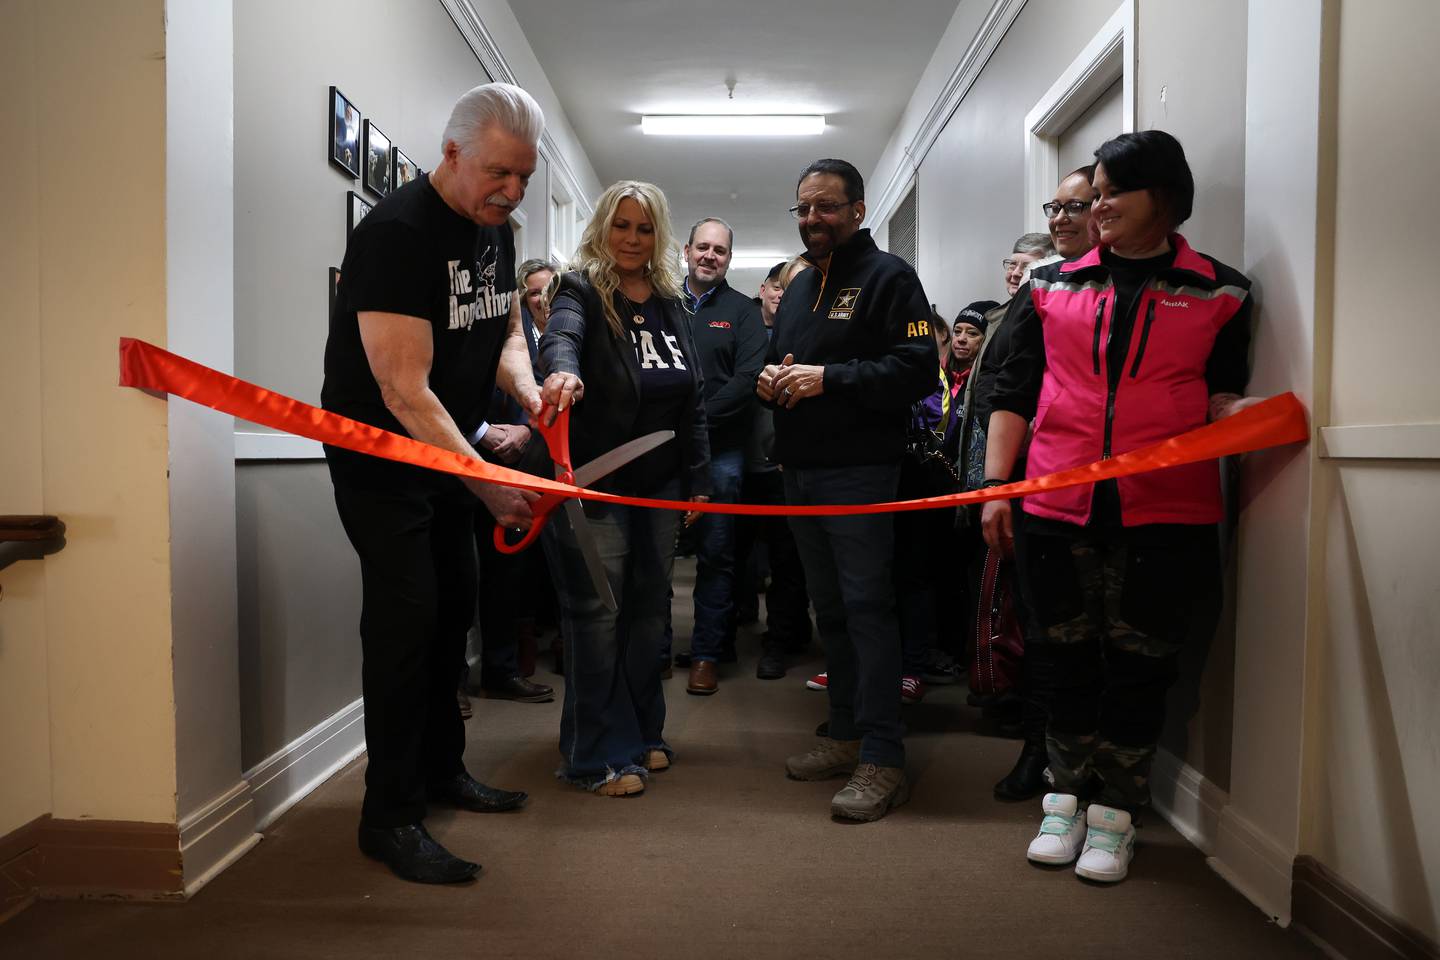 Jim Glasgow (left) along with his wife, Gina, K9s for Veterans CEO and founder Michael Tellerino and dog trainer Kate McGrail cut the ceremonial ribbon. K9s for Veterans hosted a ribbon cutting ceremony for the opening of its new training campus on Wednesday, Feb. 15, 2023, in Joliet.